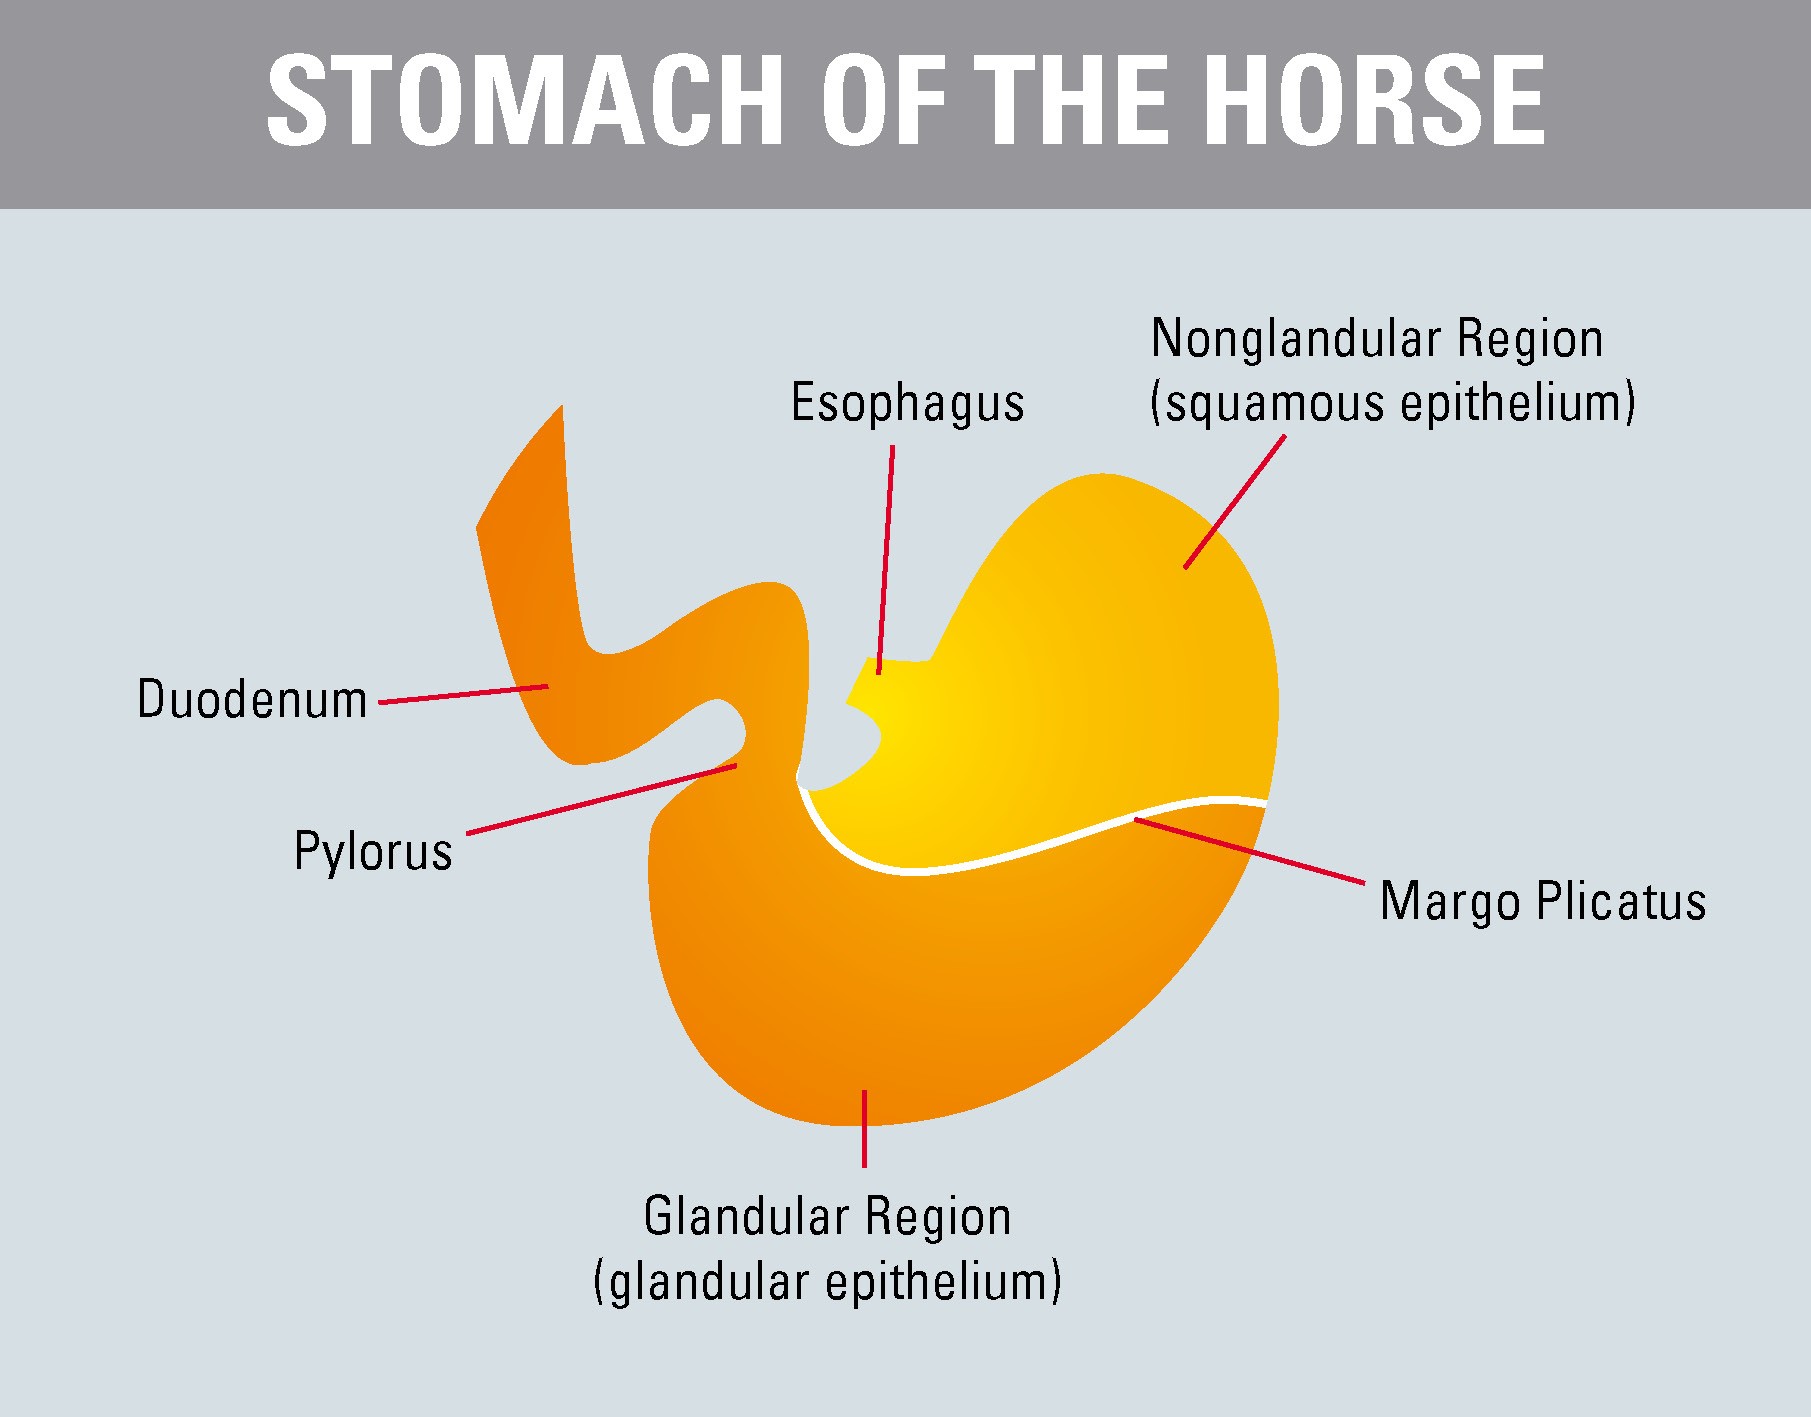 What should I feed my horse if I suspect gastric ulcers?